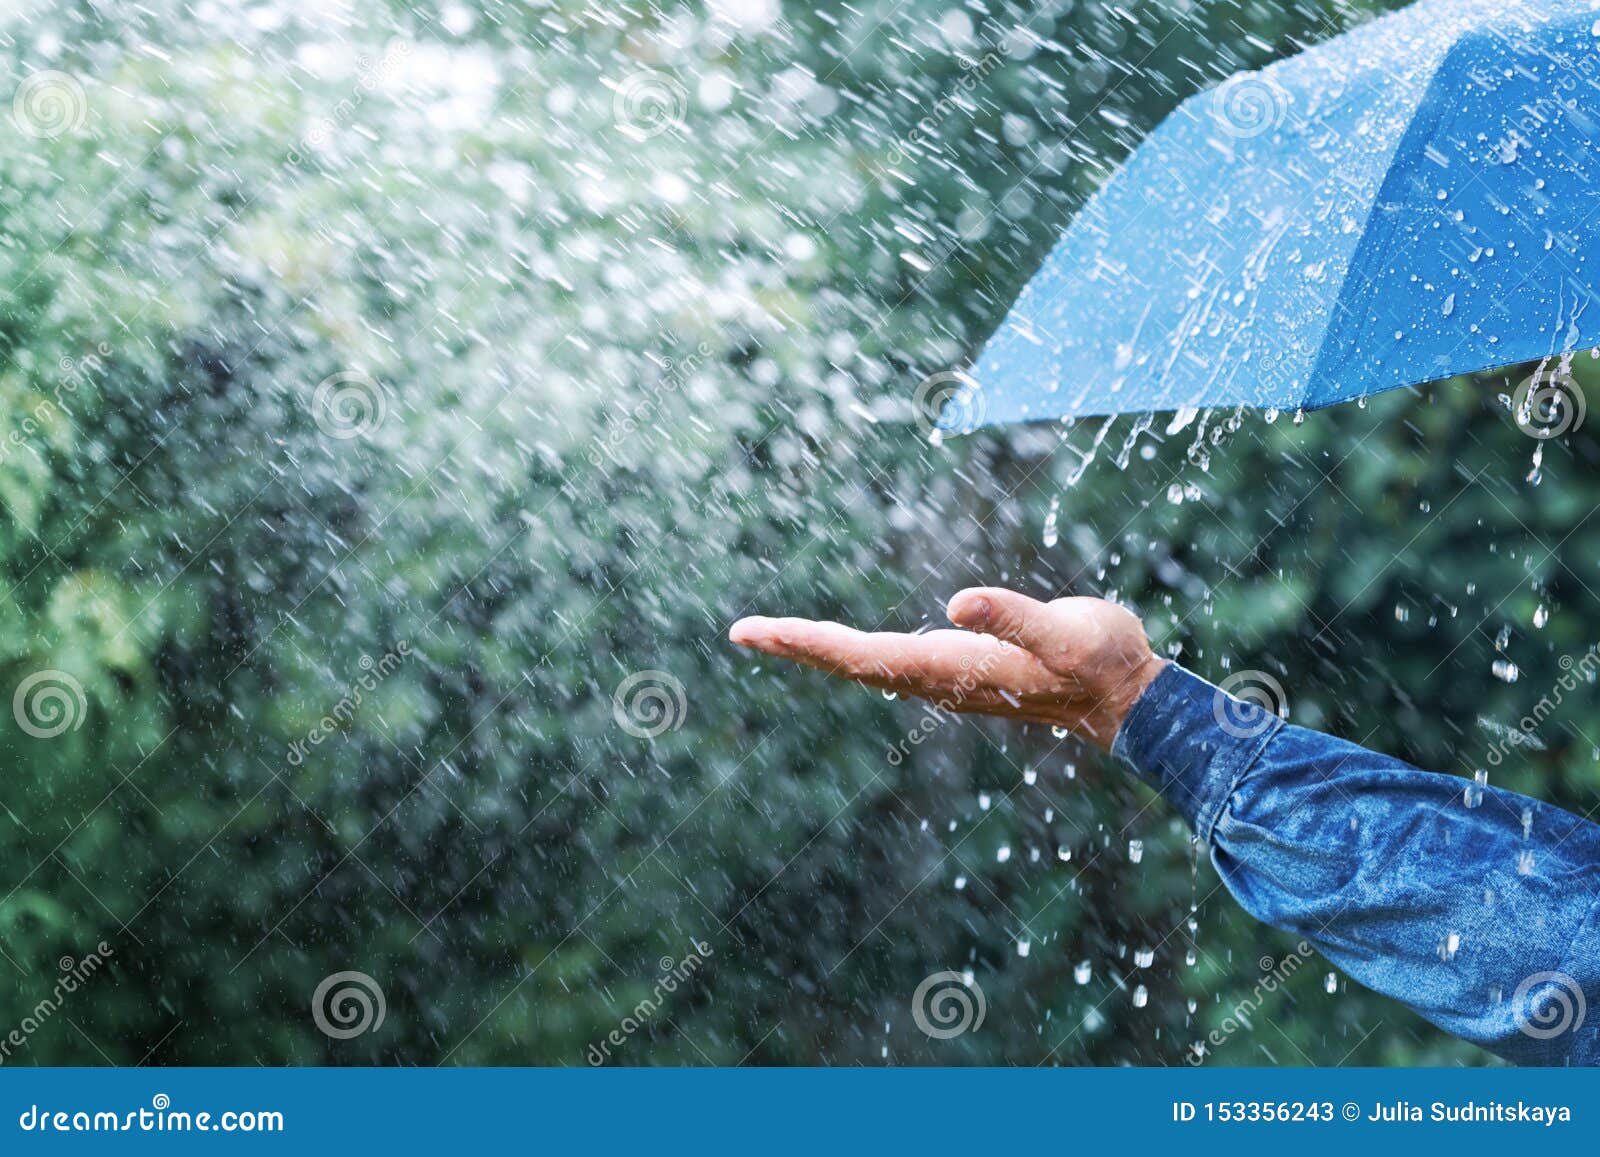 hand and blue umbrella under heavy rain against nature background. rainy weather concept